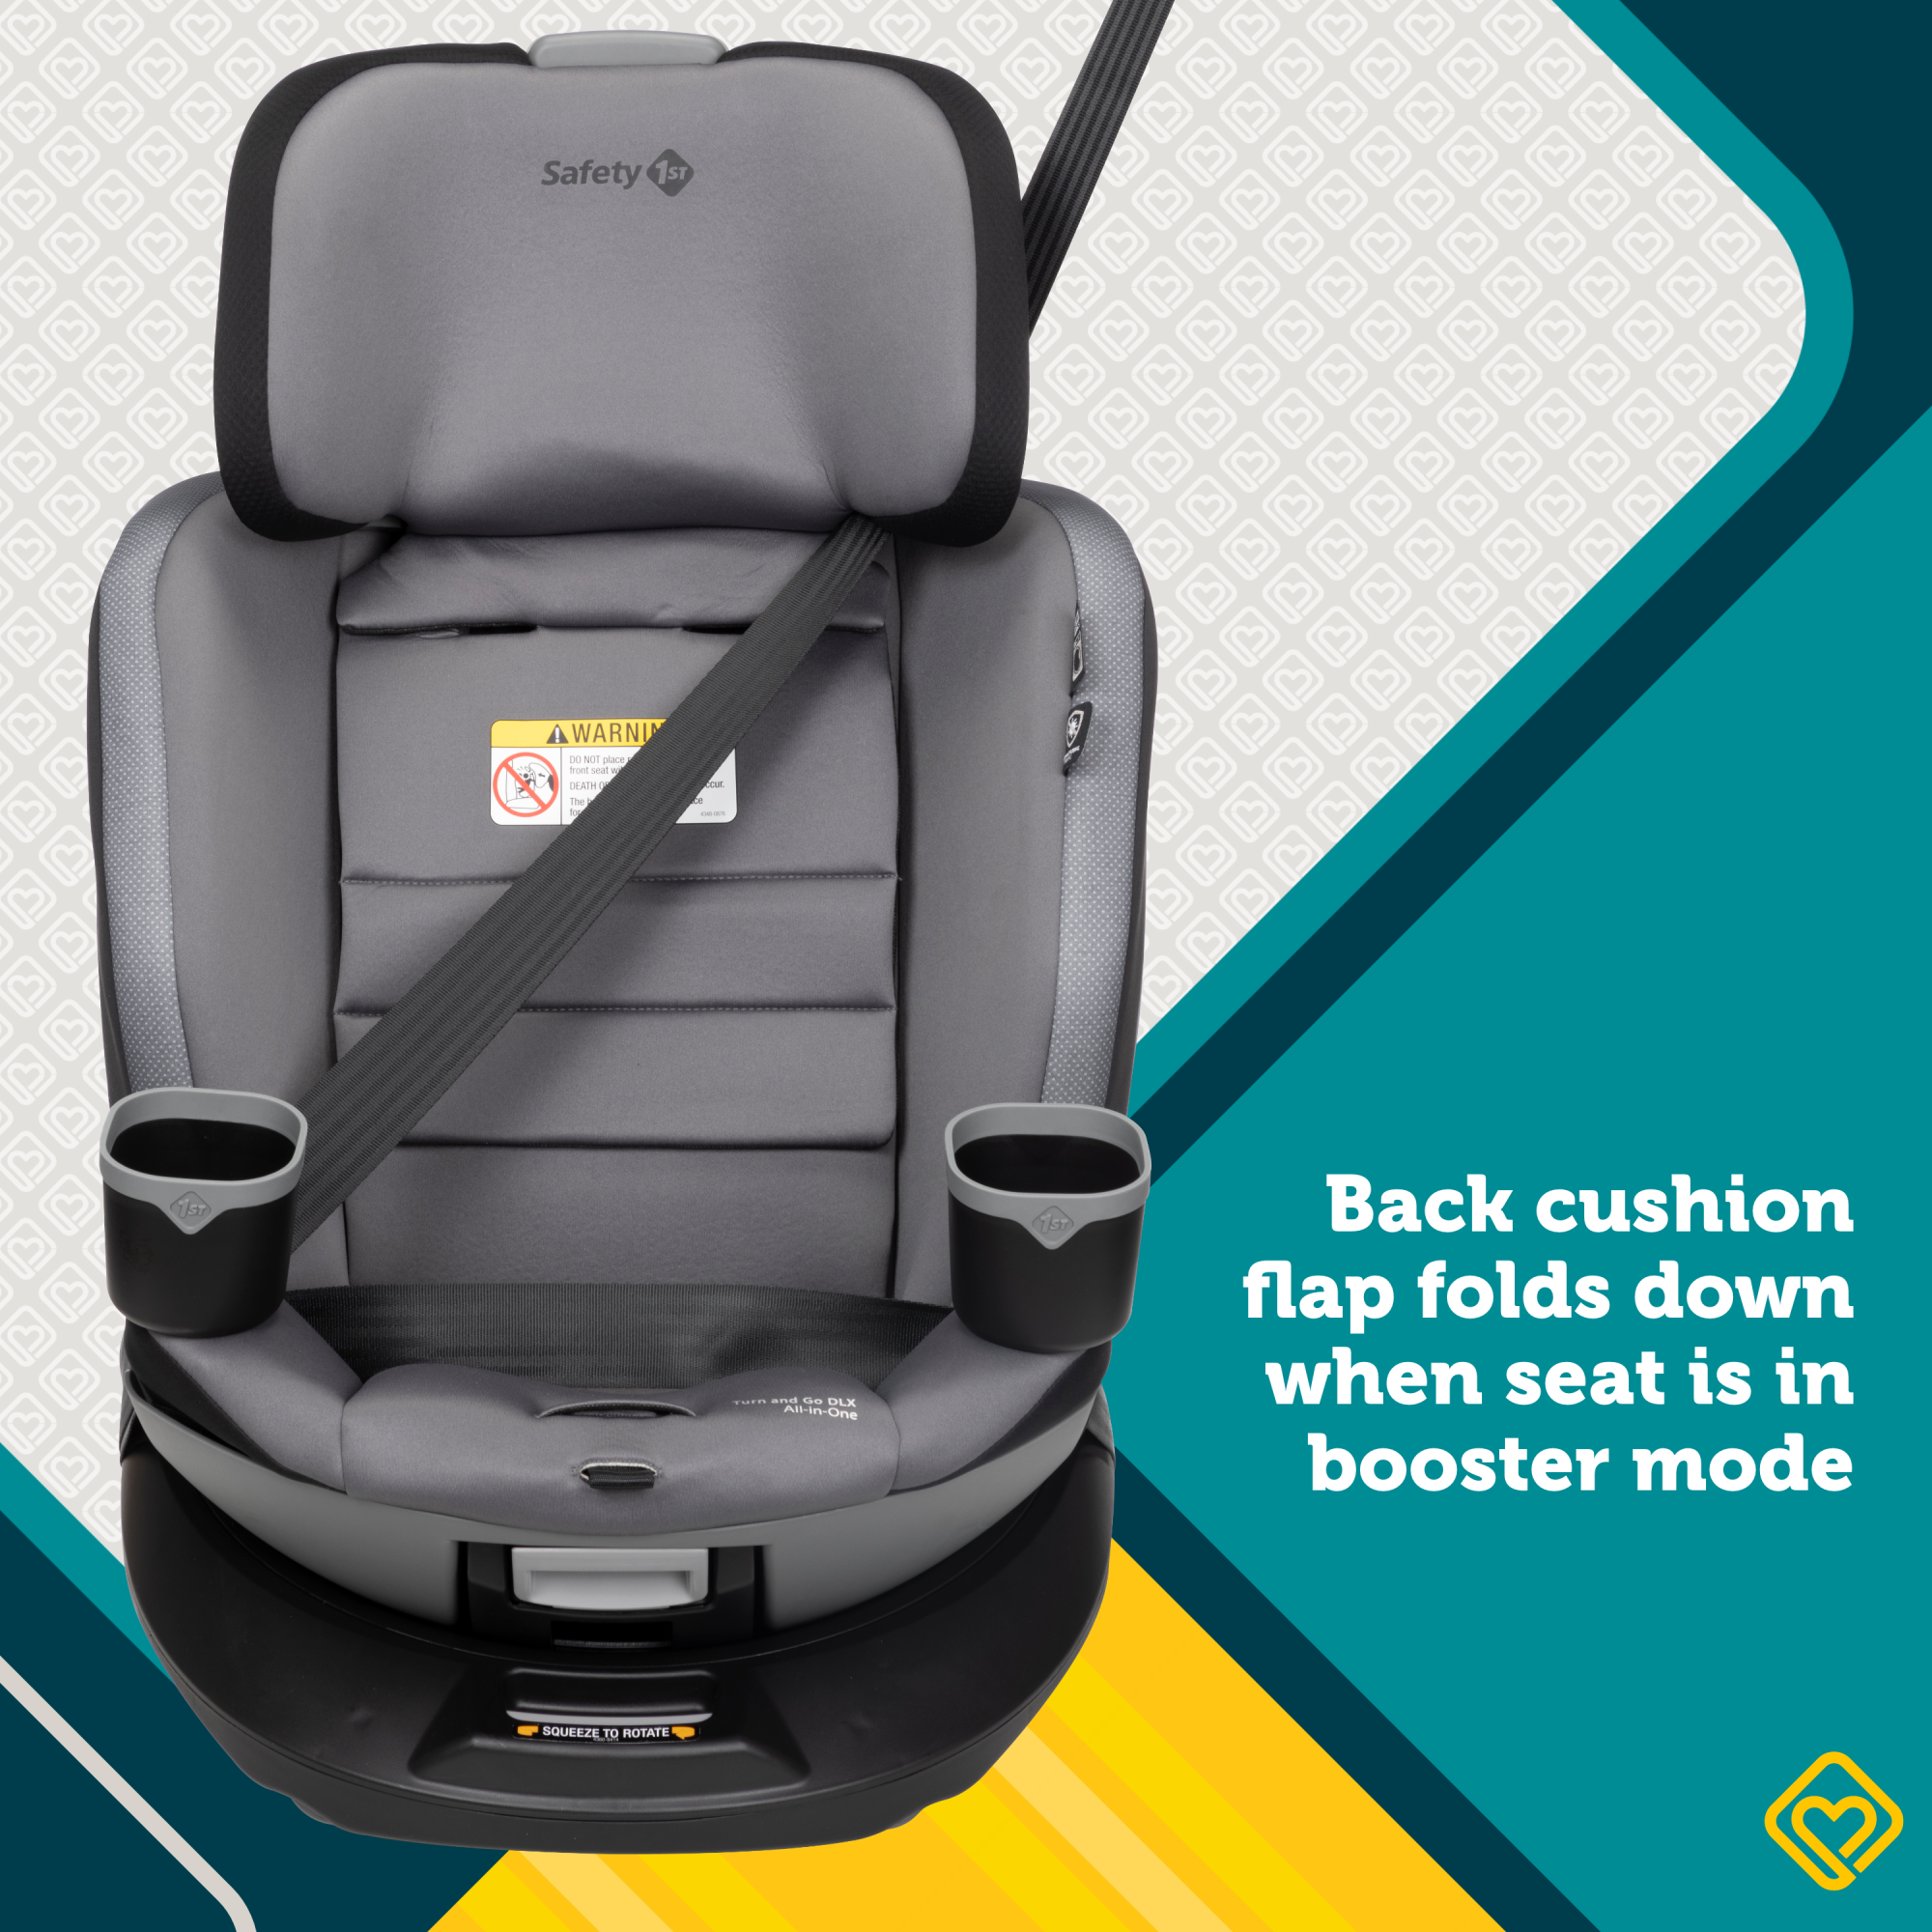 Turn and Go 360 DLX Rotating All-in-One Convertible Car Seat - one-hand auto-magnetic chest clip